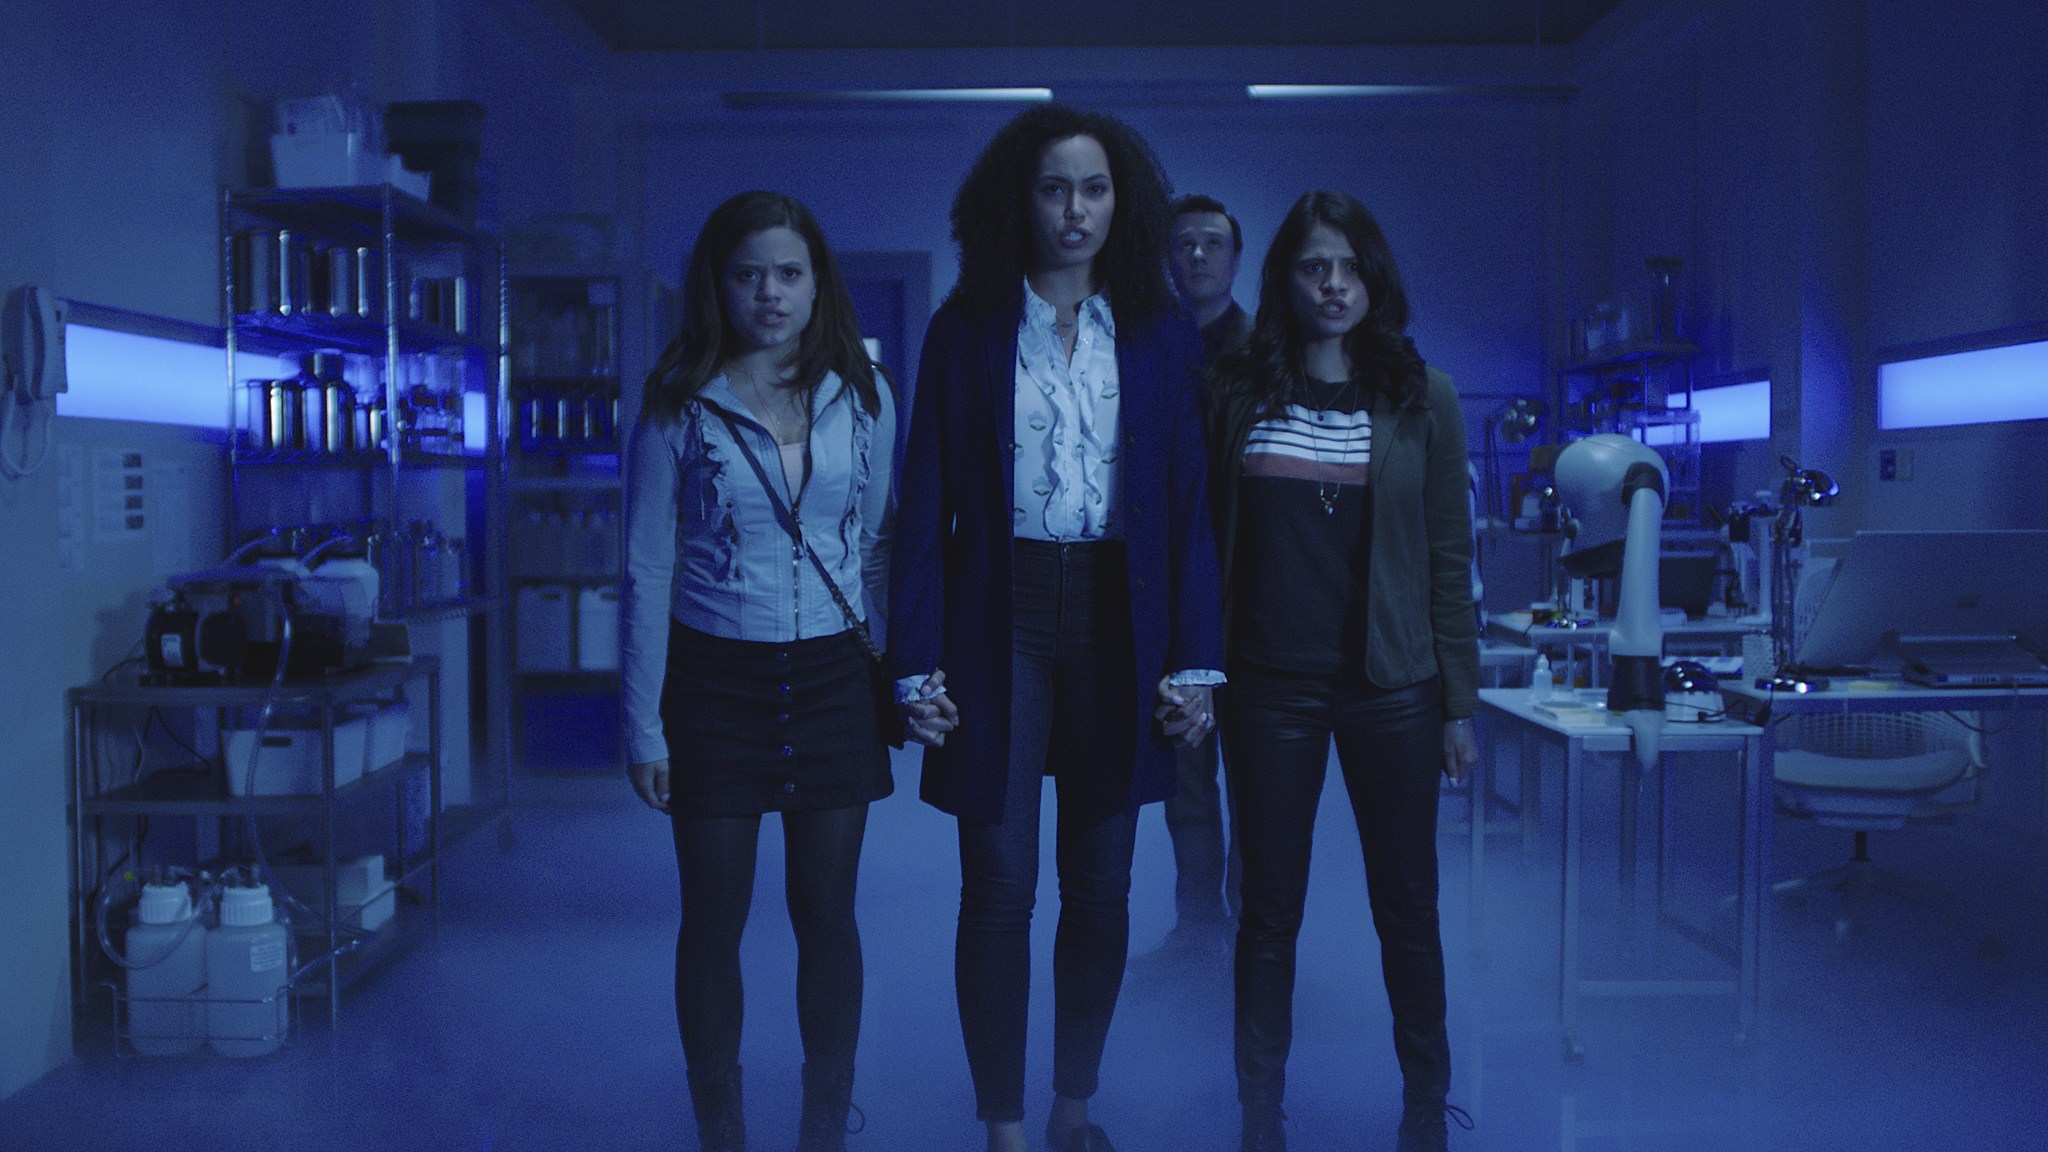 Charmed -- "Pilot"-- Image Number: CMD101g_0002r.jpg -- Pictured (L-R): Sarah Jeffery as Maggie Vera, Madeleine Mantock as Macy Vaughn, Rupert Evans as Harry Greenwood and Melonie Diaz as Mel Vera -- Photo: The CW -- Ì?å© 2018 The CW Network, LLC. All Rights Reserved